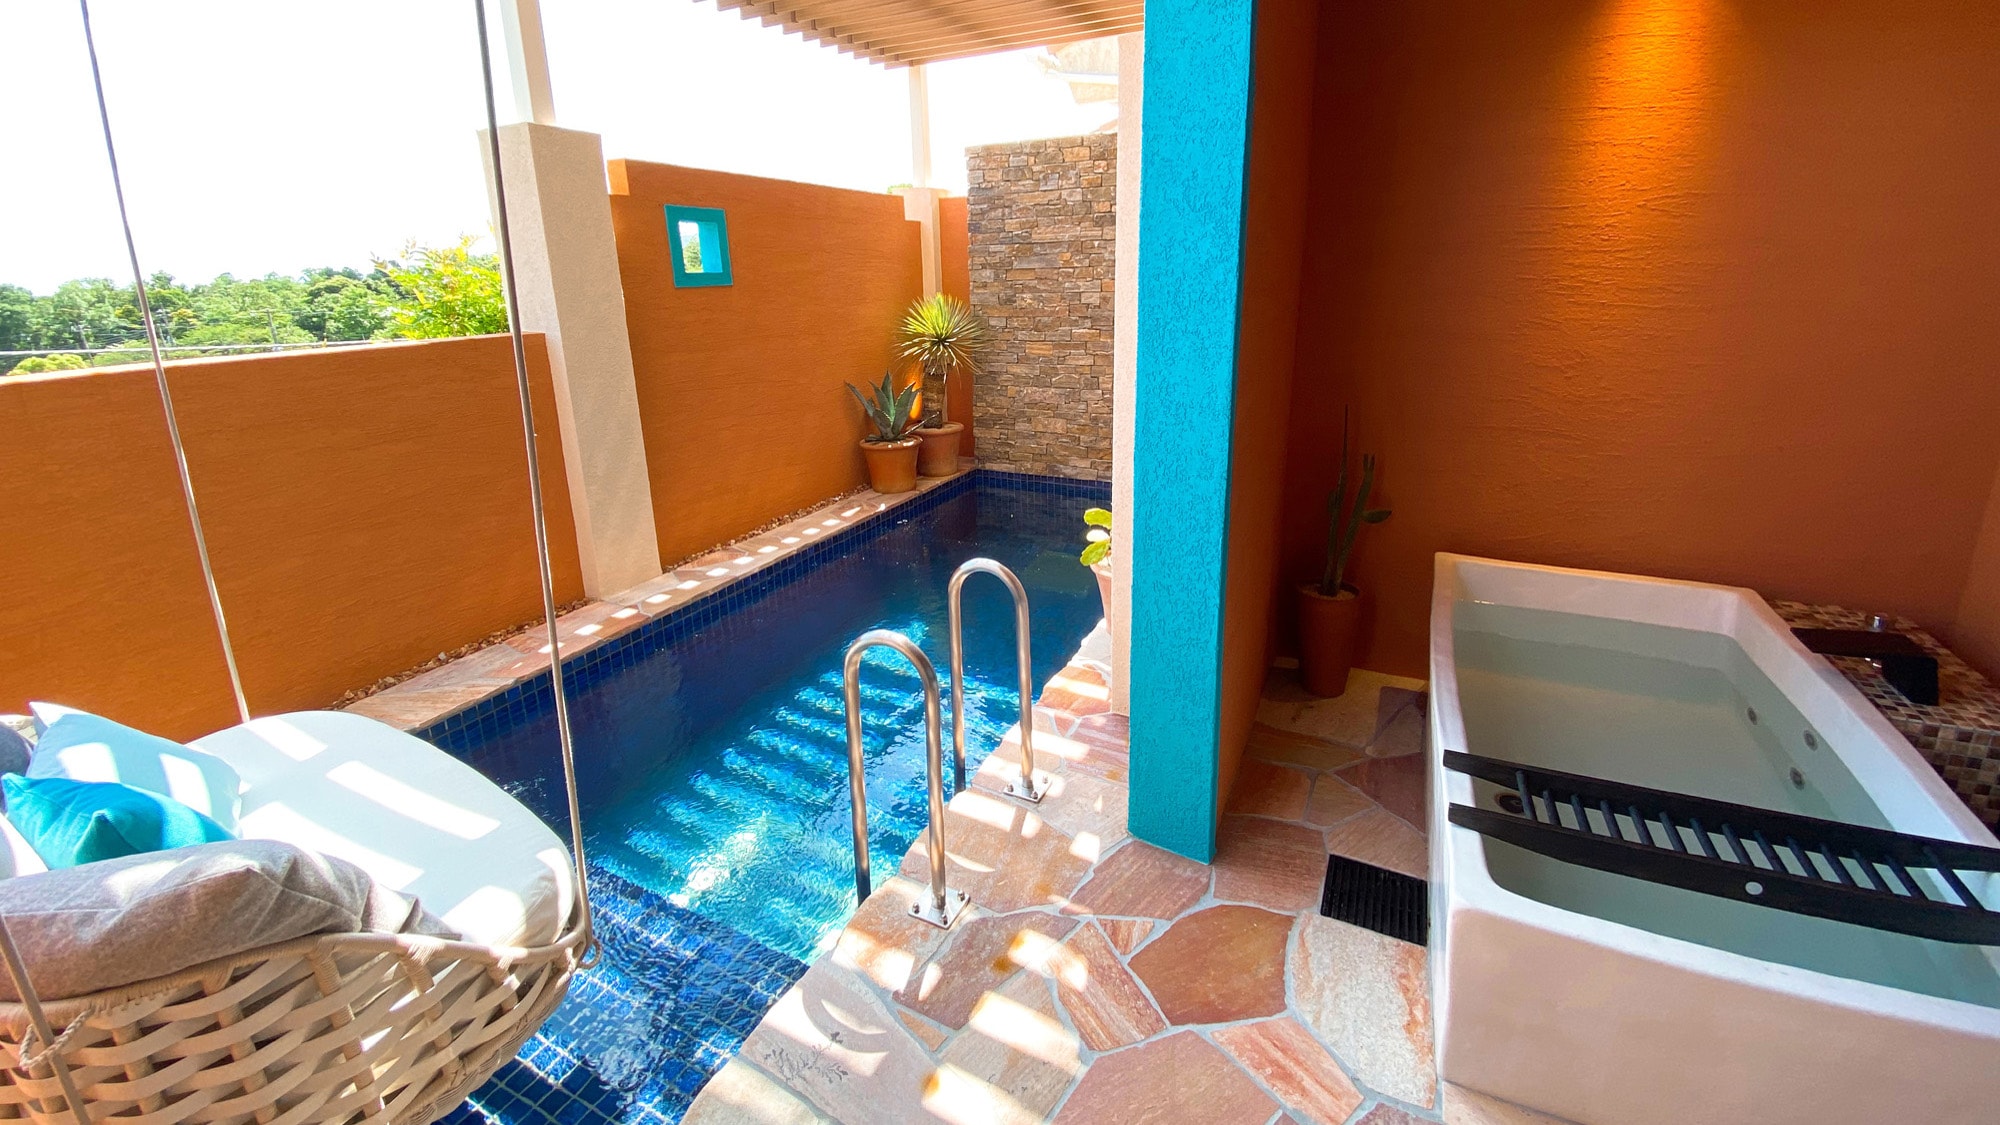 Room with open-air bath and heated pool: Room 01 Santa Fe Suite Terrace has an open-air bath and heated private pool.